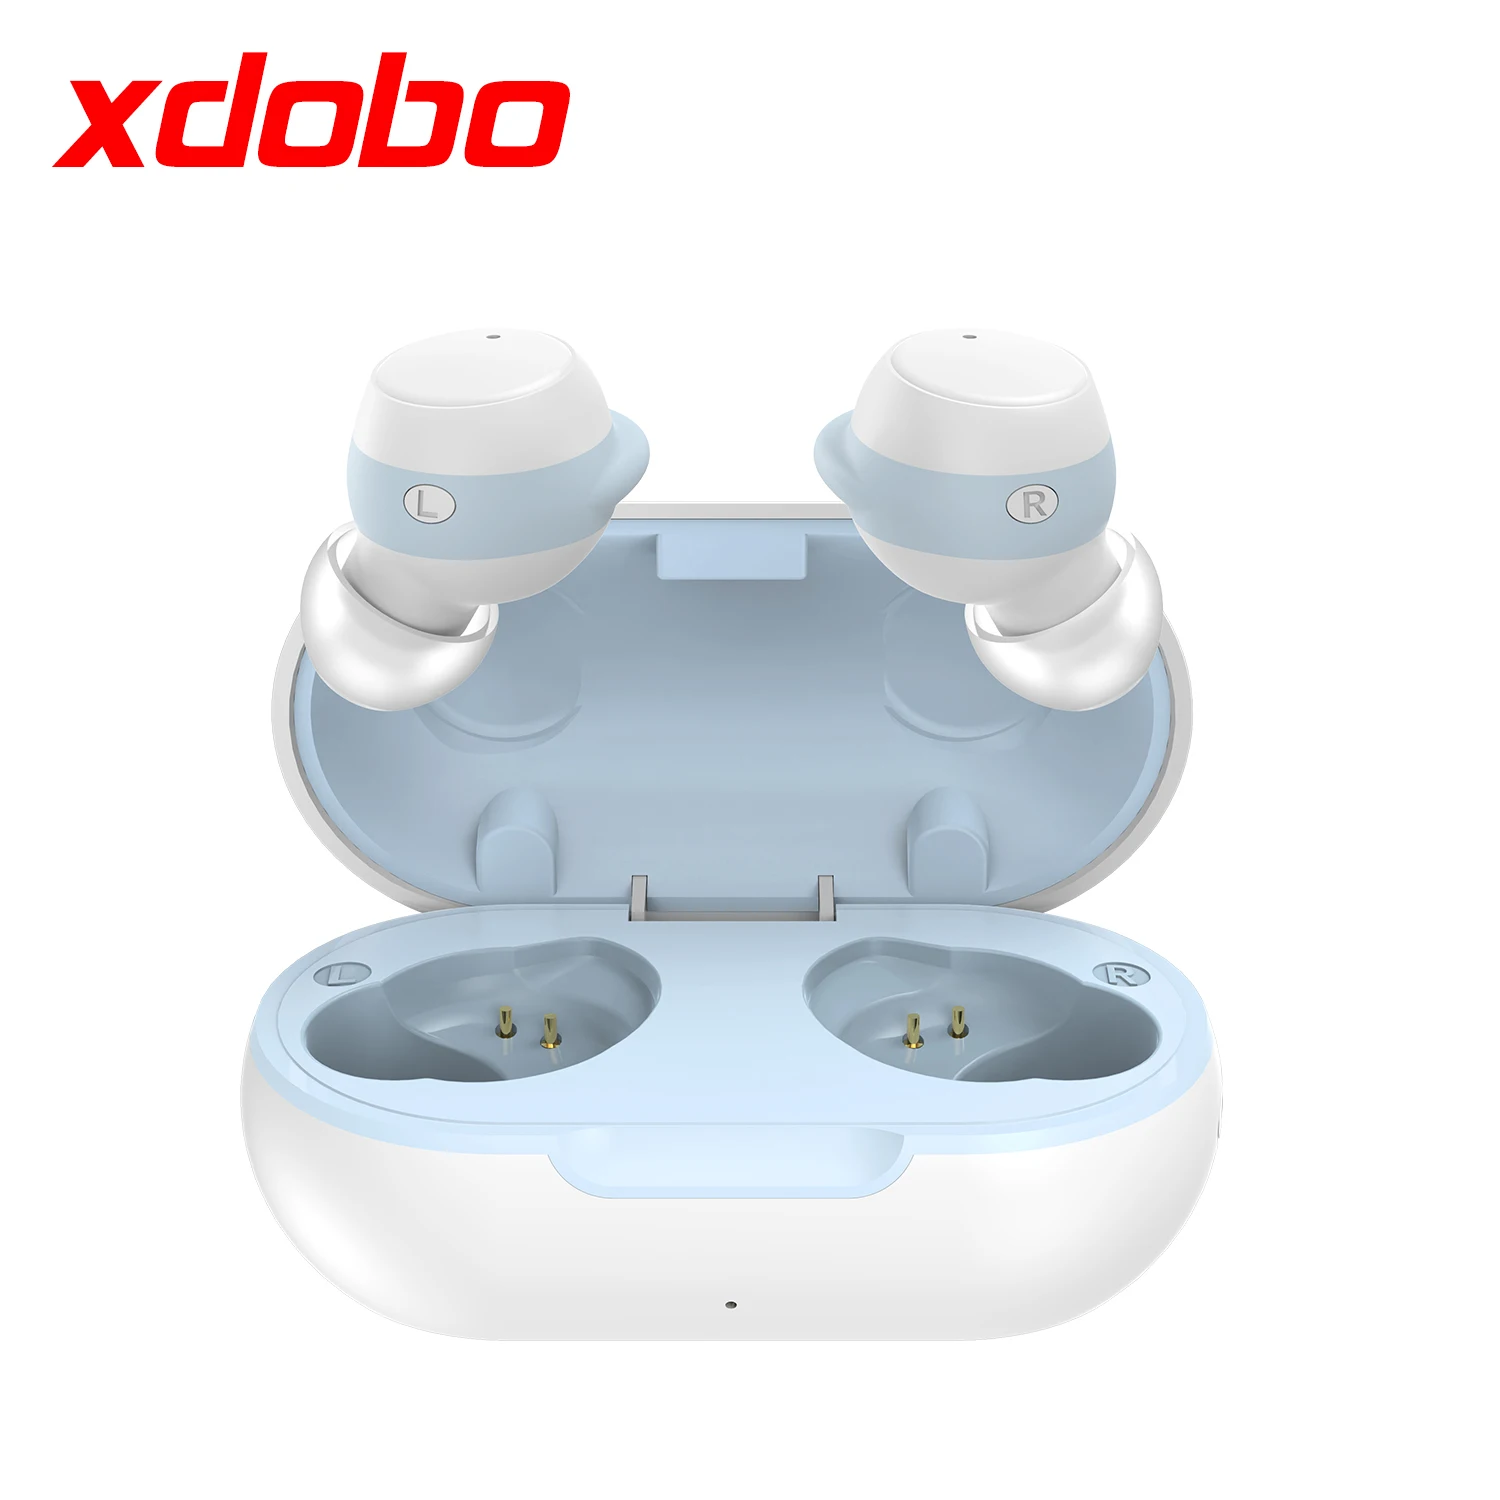 

2021 XDOBO Official Store Waterproof TWS Wireless Earphone Headphones Sport Earbuds with Charge Box, Black,white